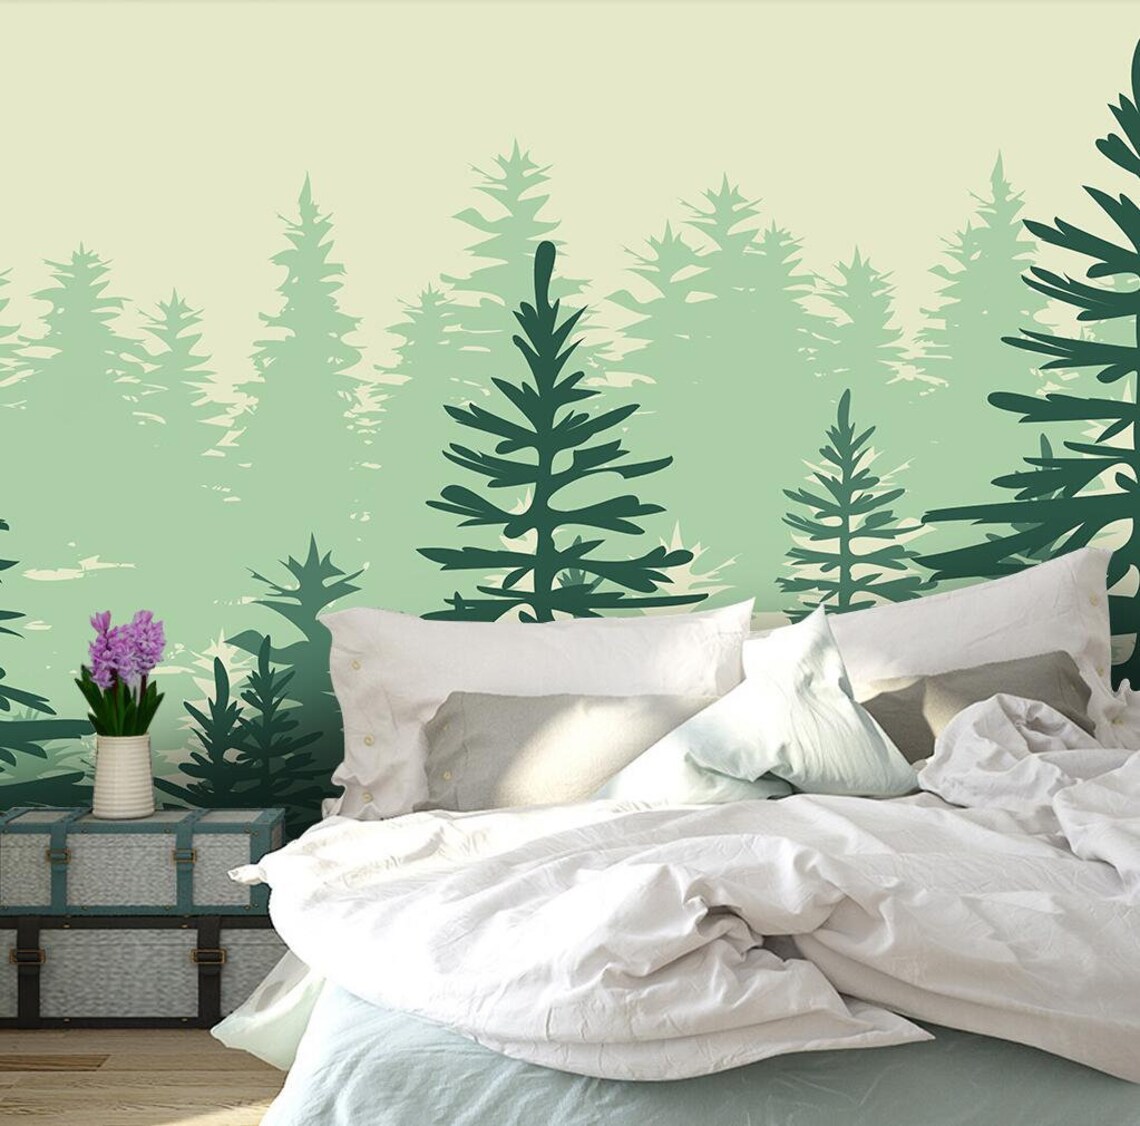 Modern Hand Painted Green Pines Trees Wallpaper Wall Mural | Etsy